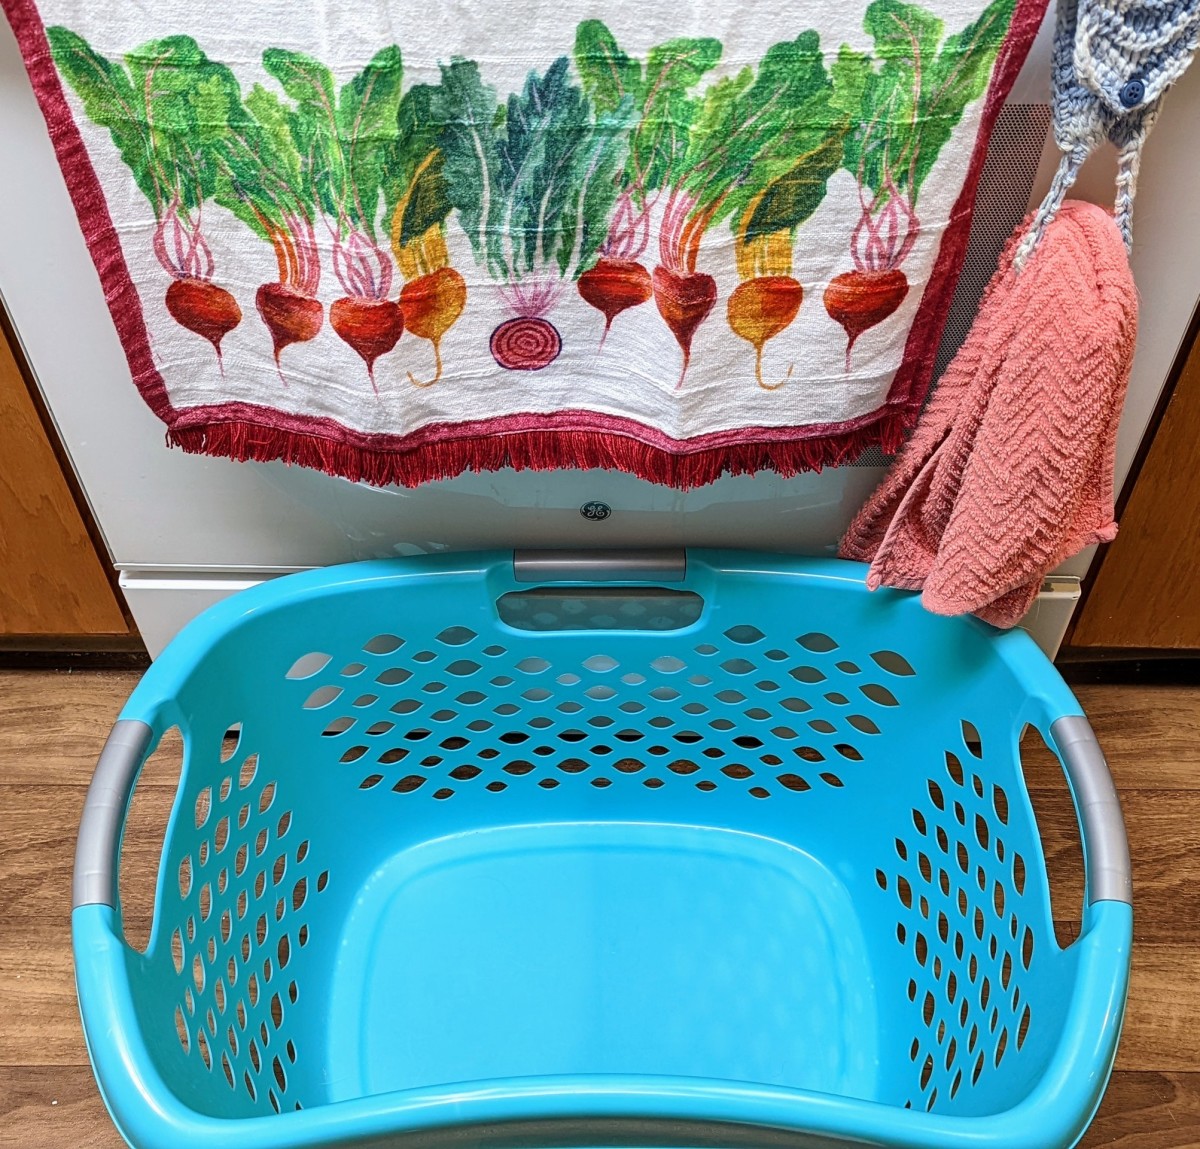 Check out these suggestions and your basket can be empty too!